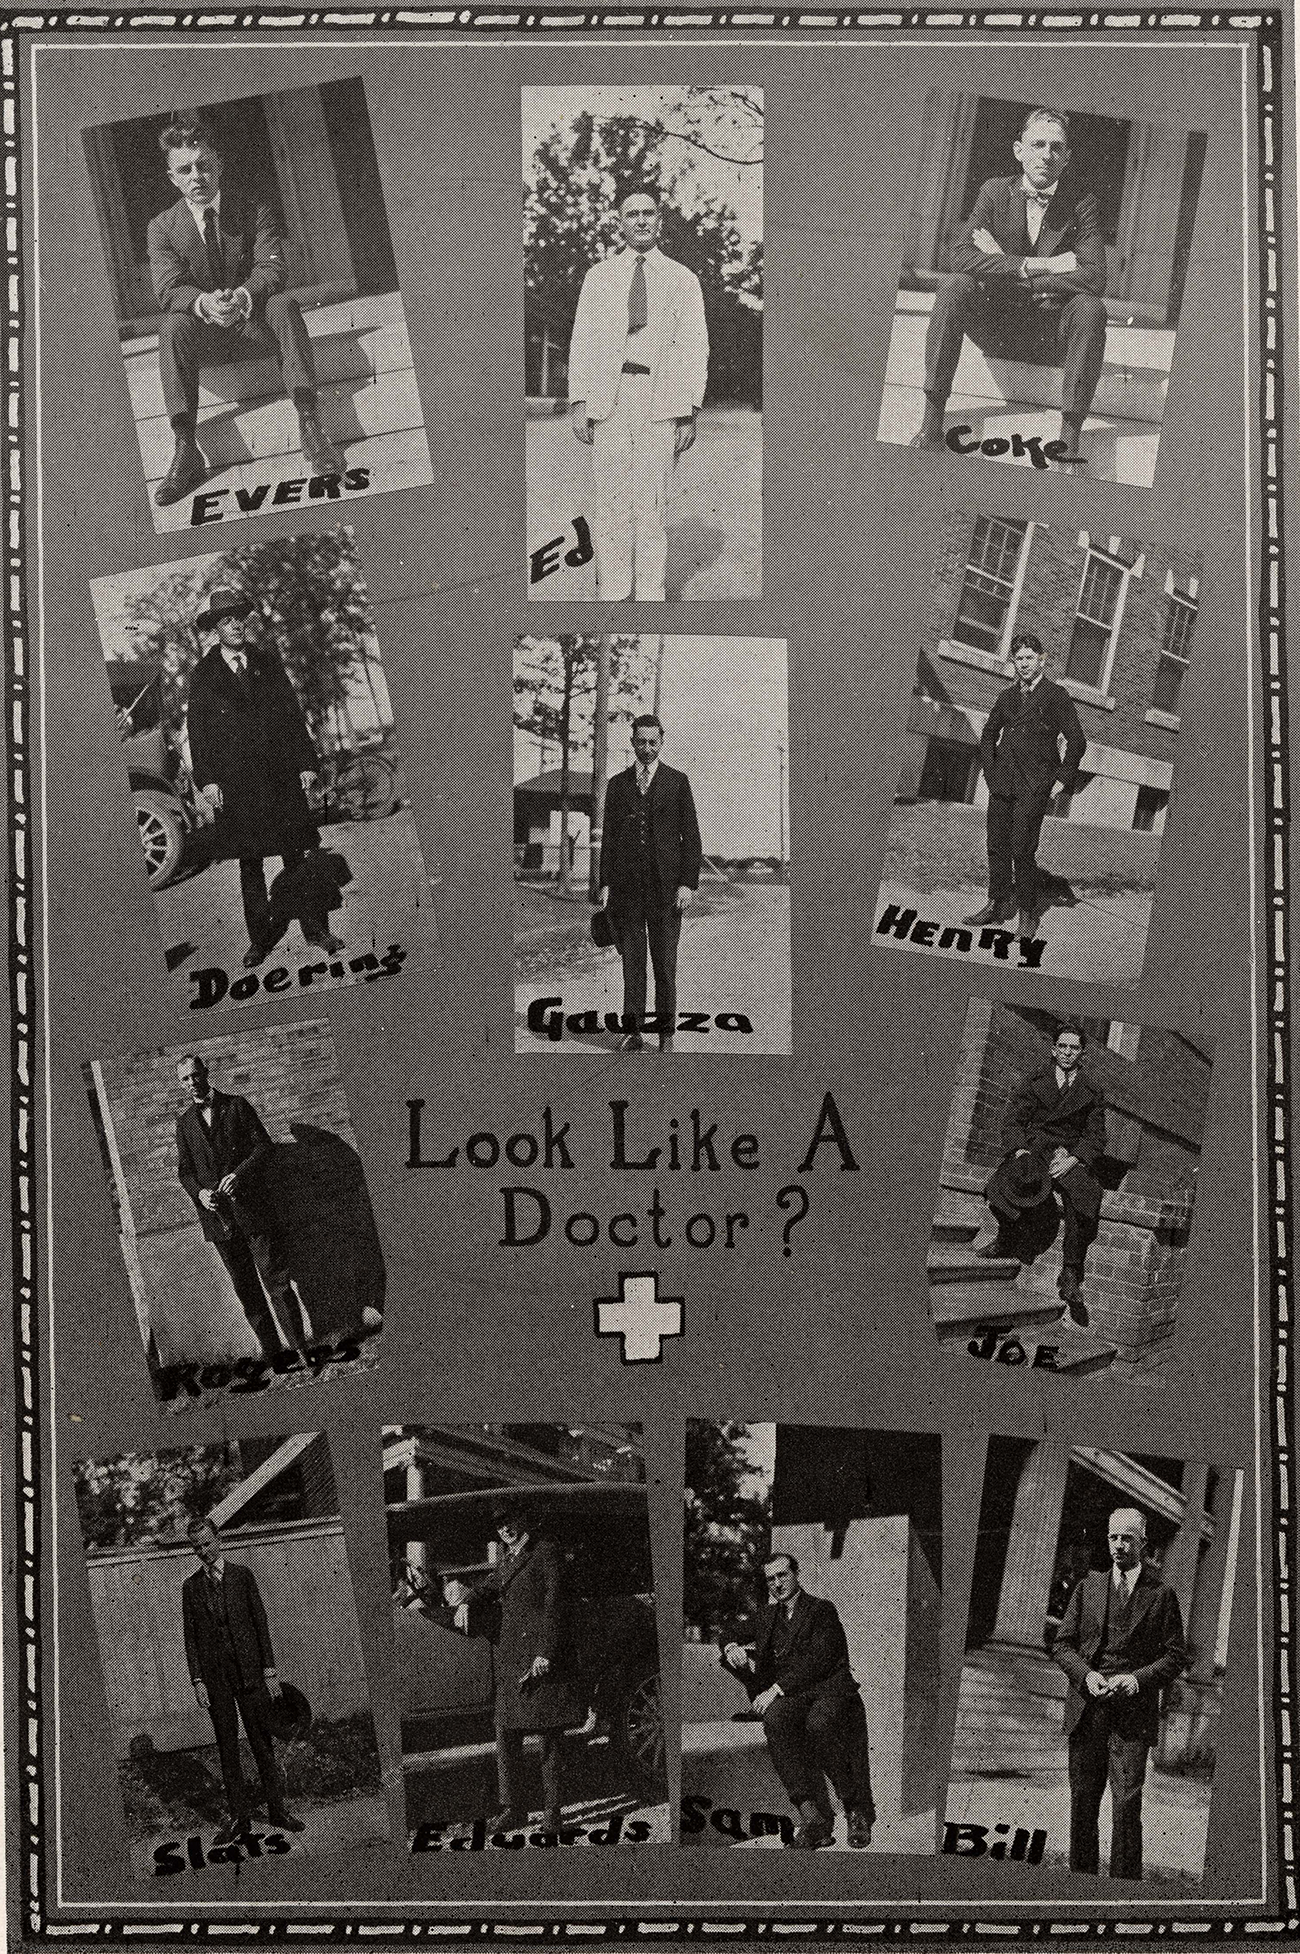 Look like a doctor? Make sure you have a coat and tie, or at least that was the prerequisite in 1921. Photo courtesy Baylor College of Medicine Archives.